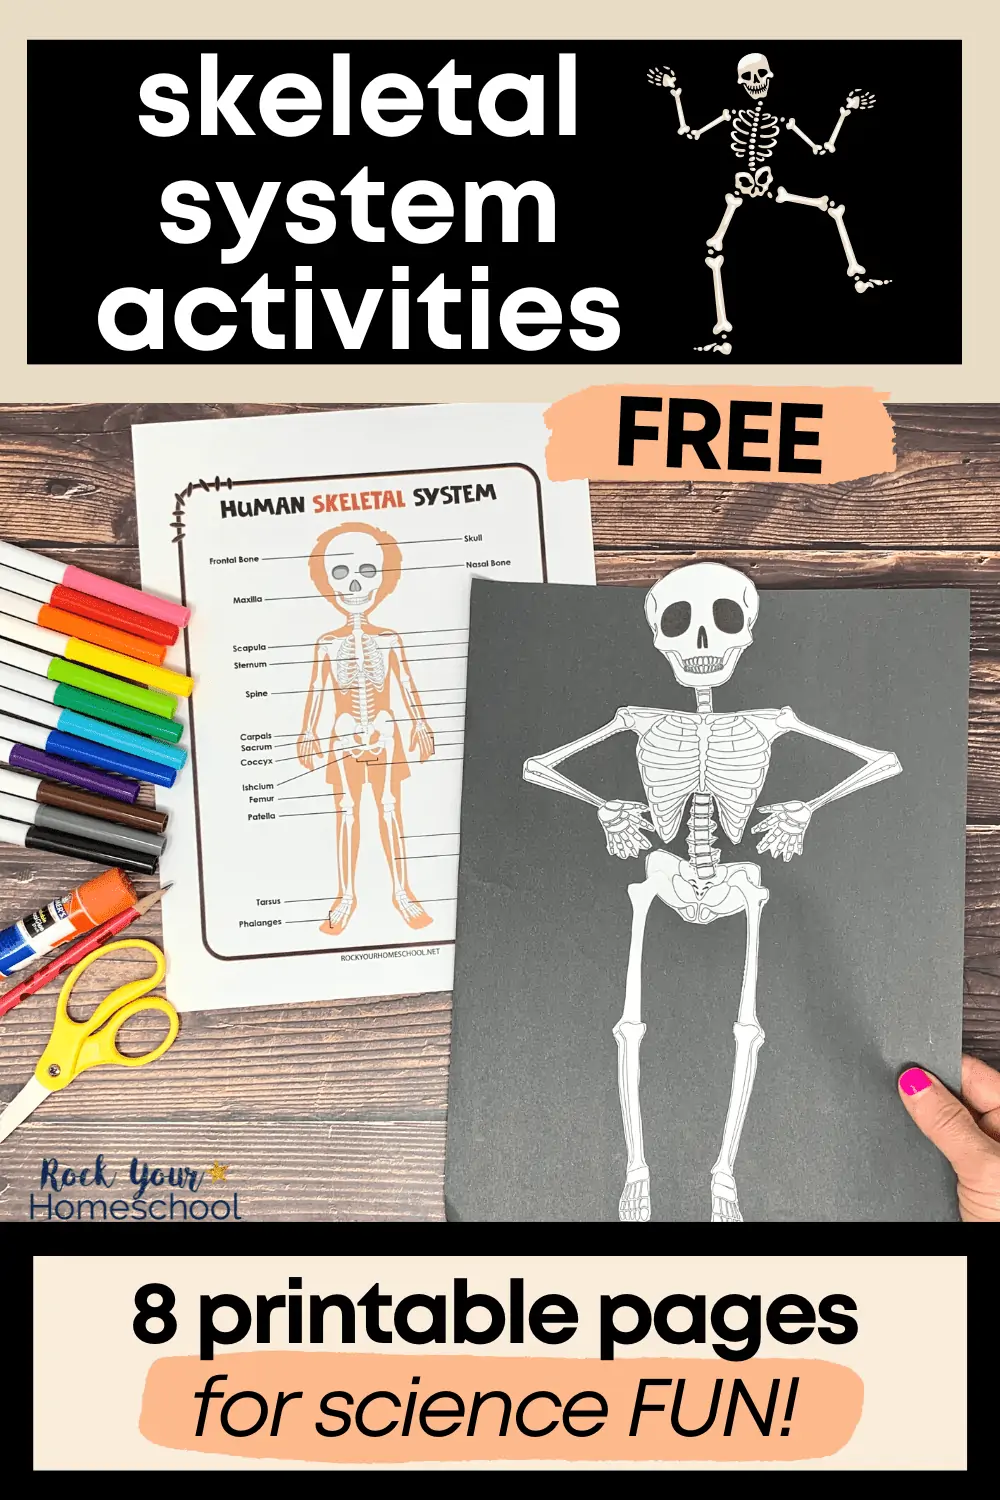 Human Skeletal System Activities: 5 Awesome Ways (+ Free Printable Pack)